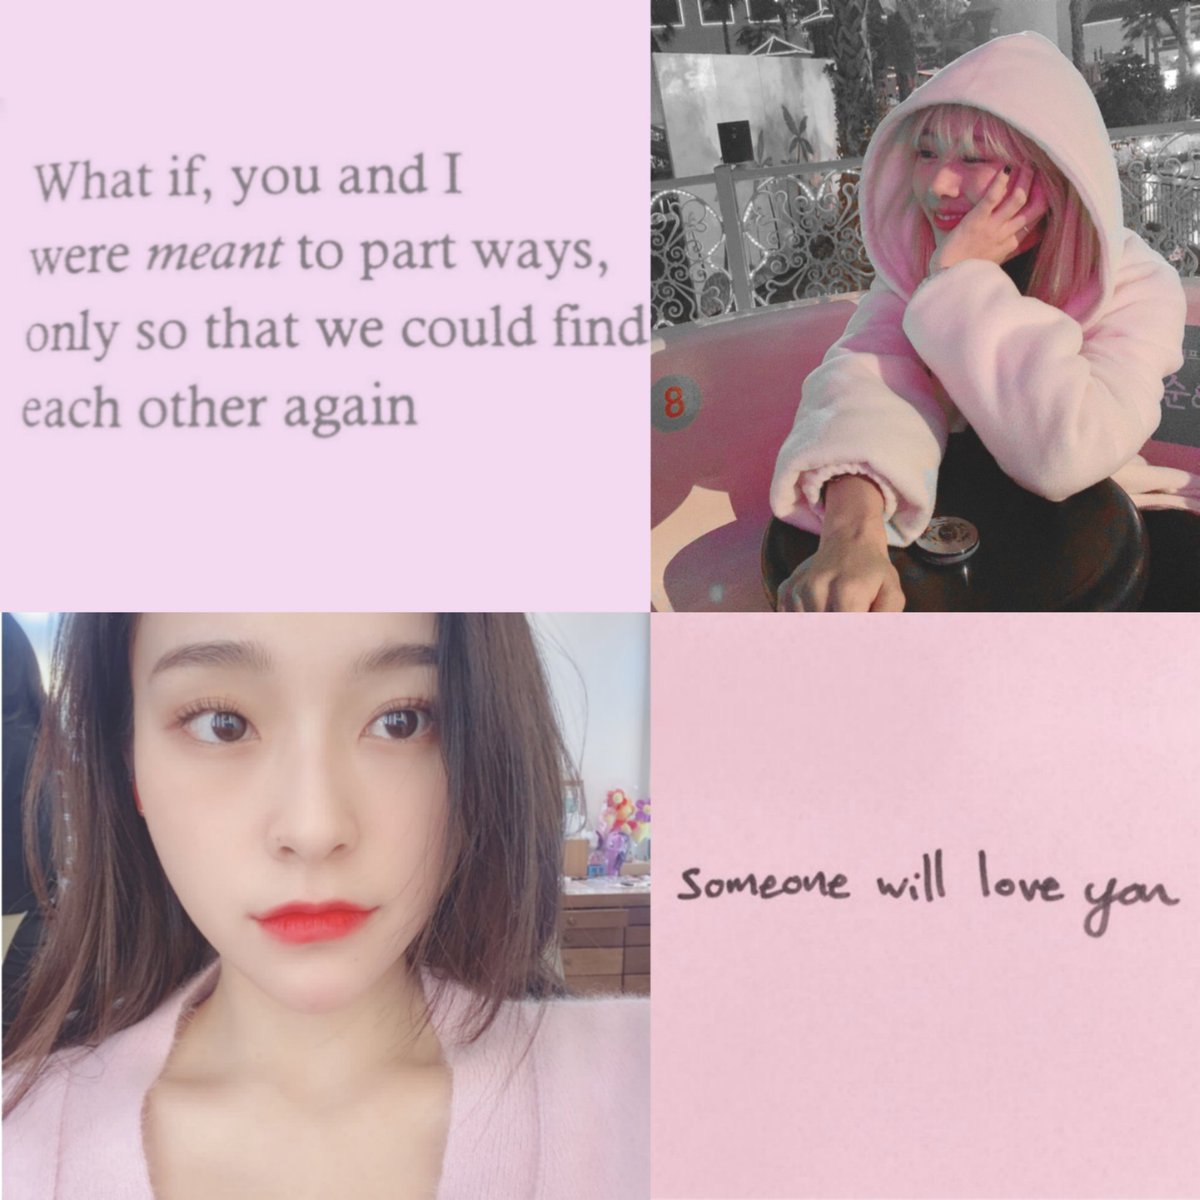 "i keep thinking about you"gahyeon was yoohyeon's first love that she left behind to go after her dreams in seoul. yoohyeon has a hard time moving on, so years later, she returns to her hometown looking for the other girl. past and present collide when they meet again...